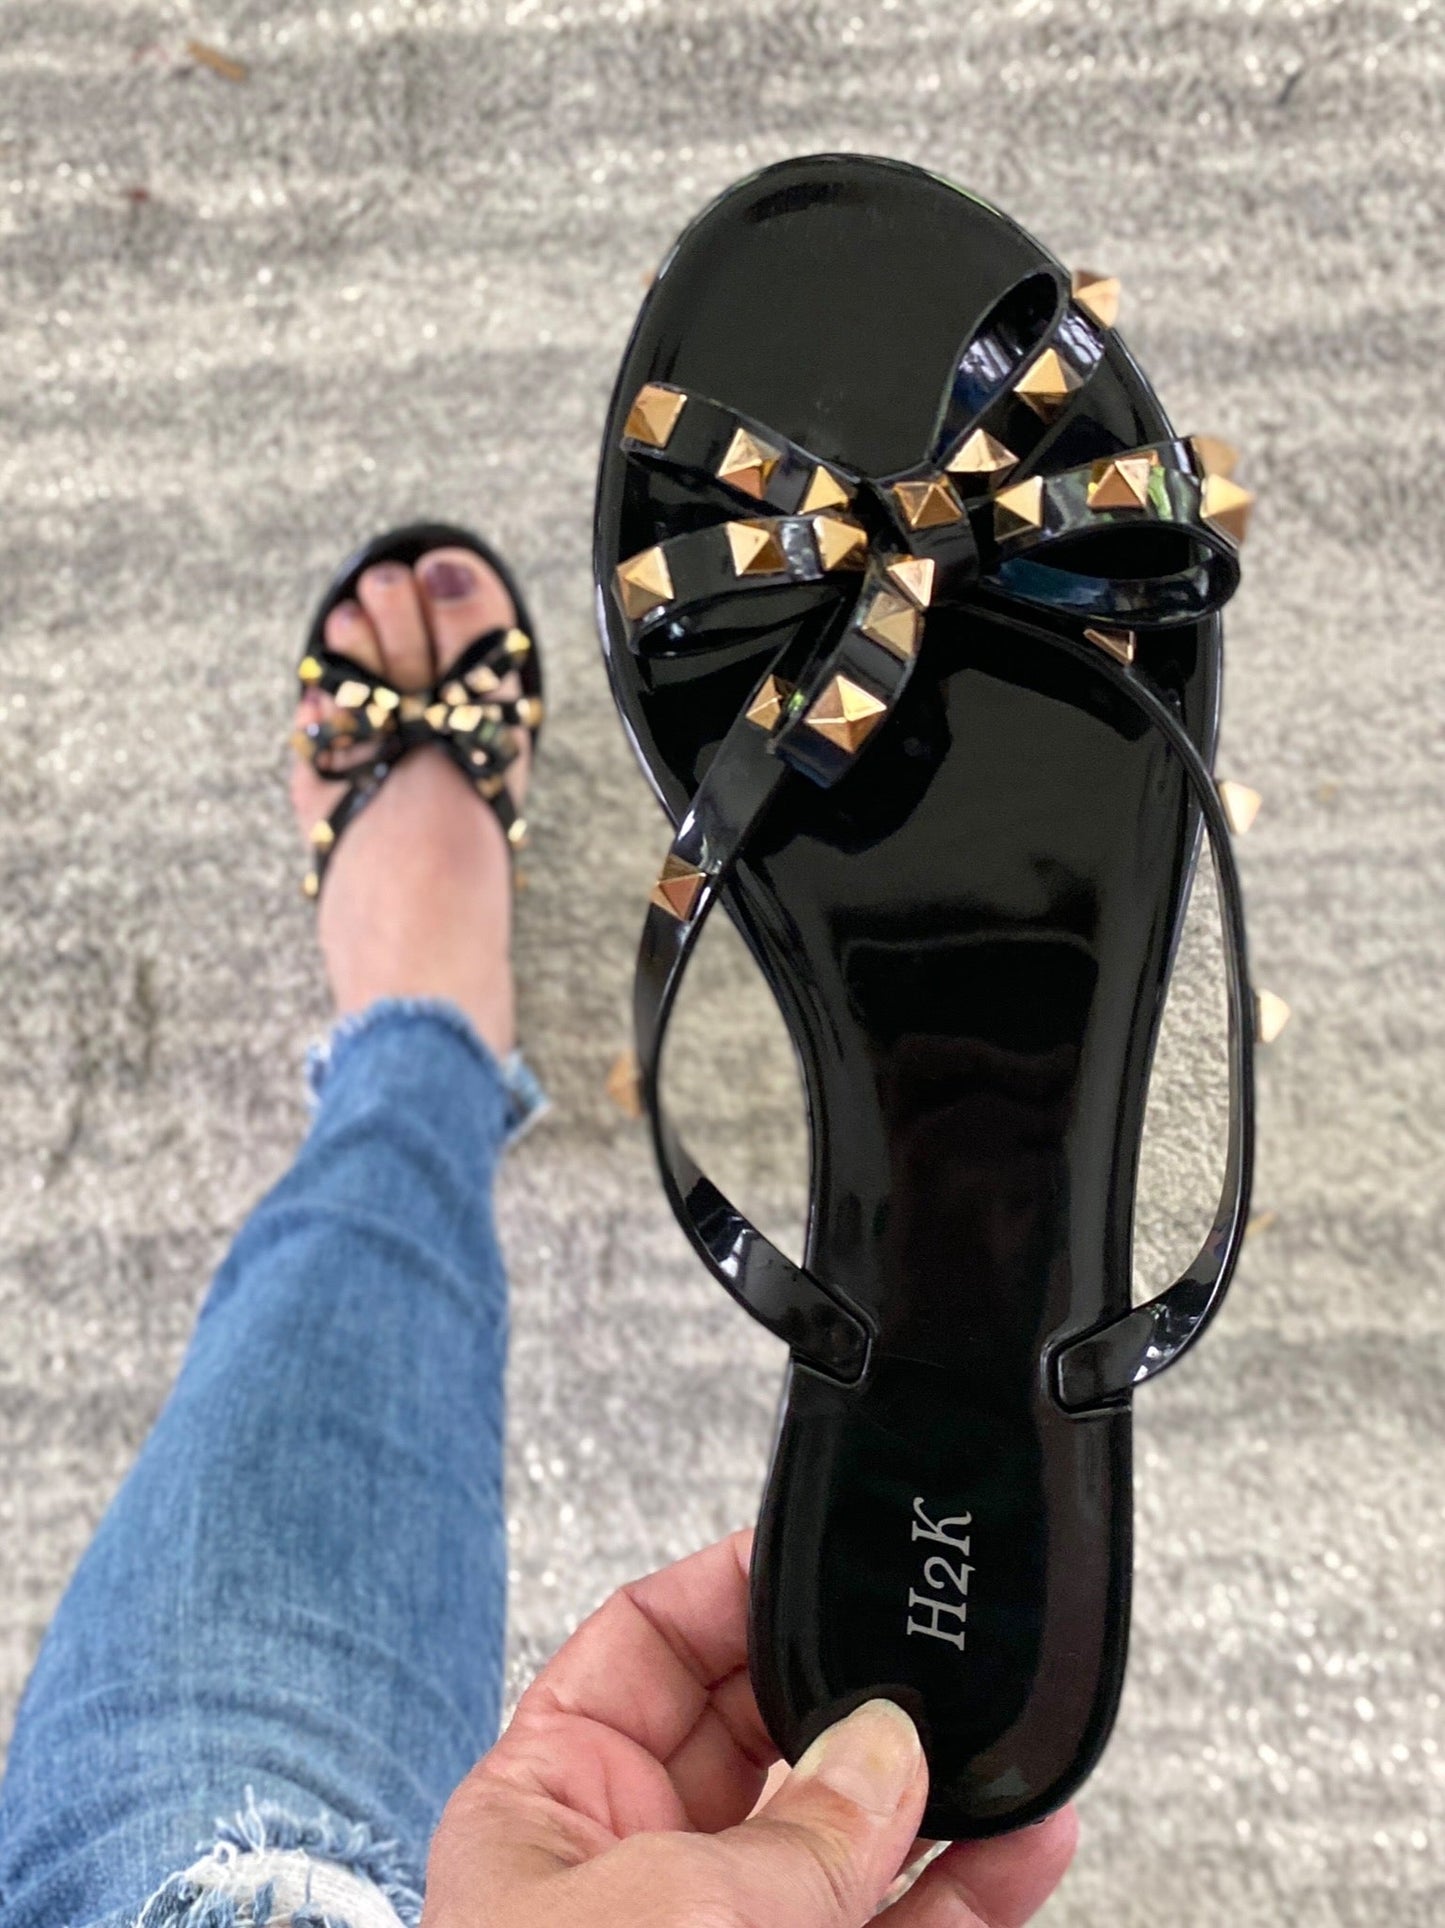 Bow-Youtiful Sandals in Black